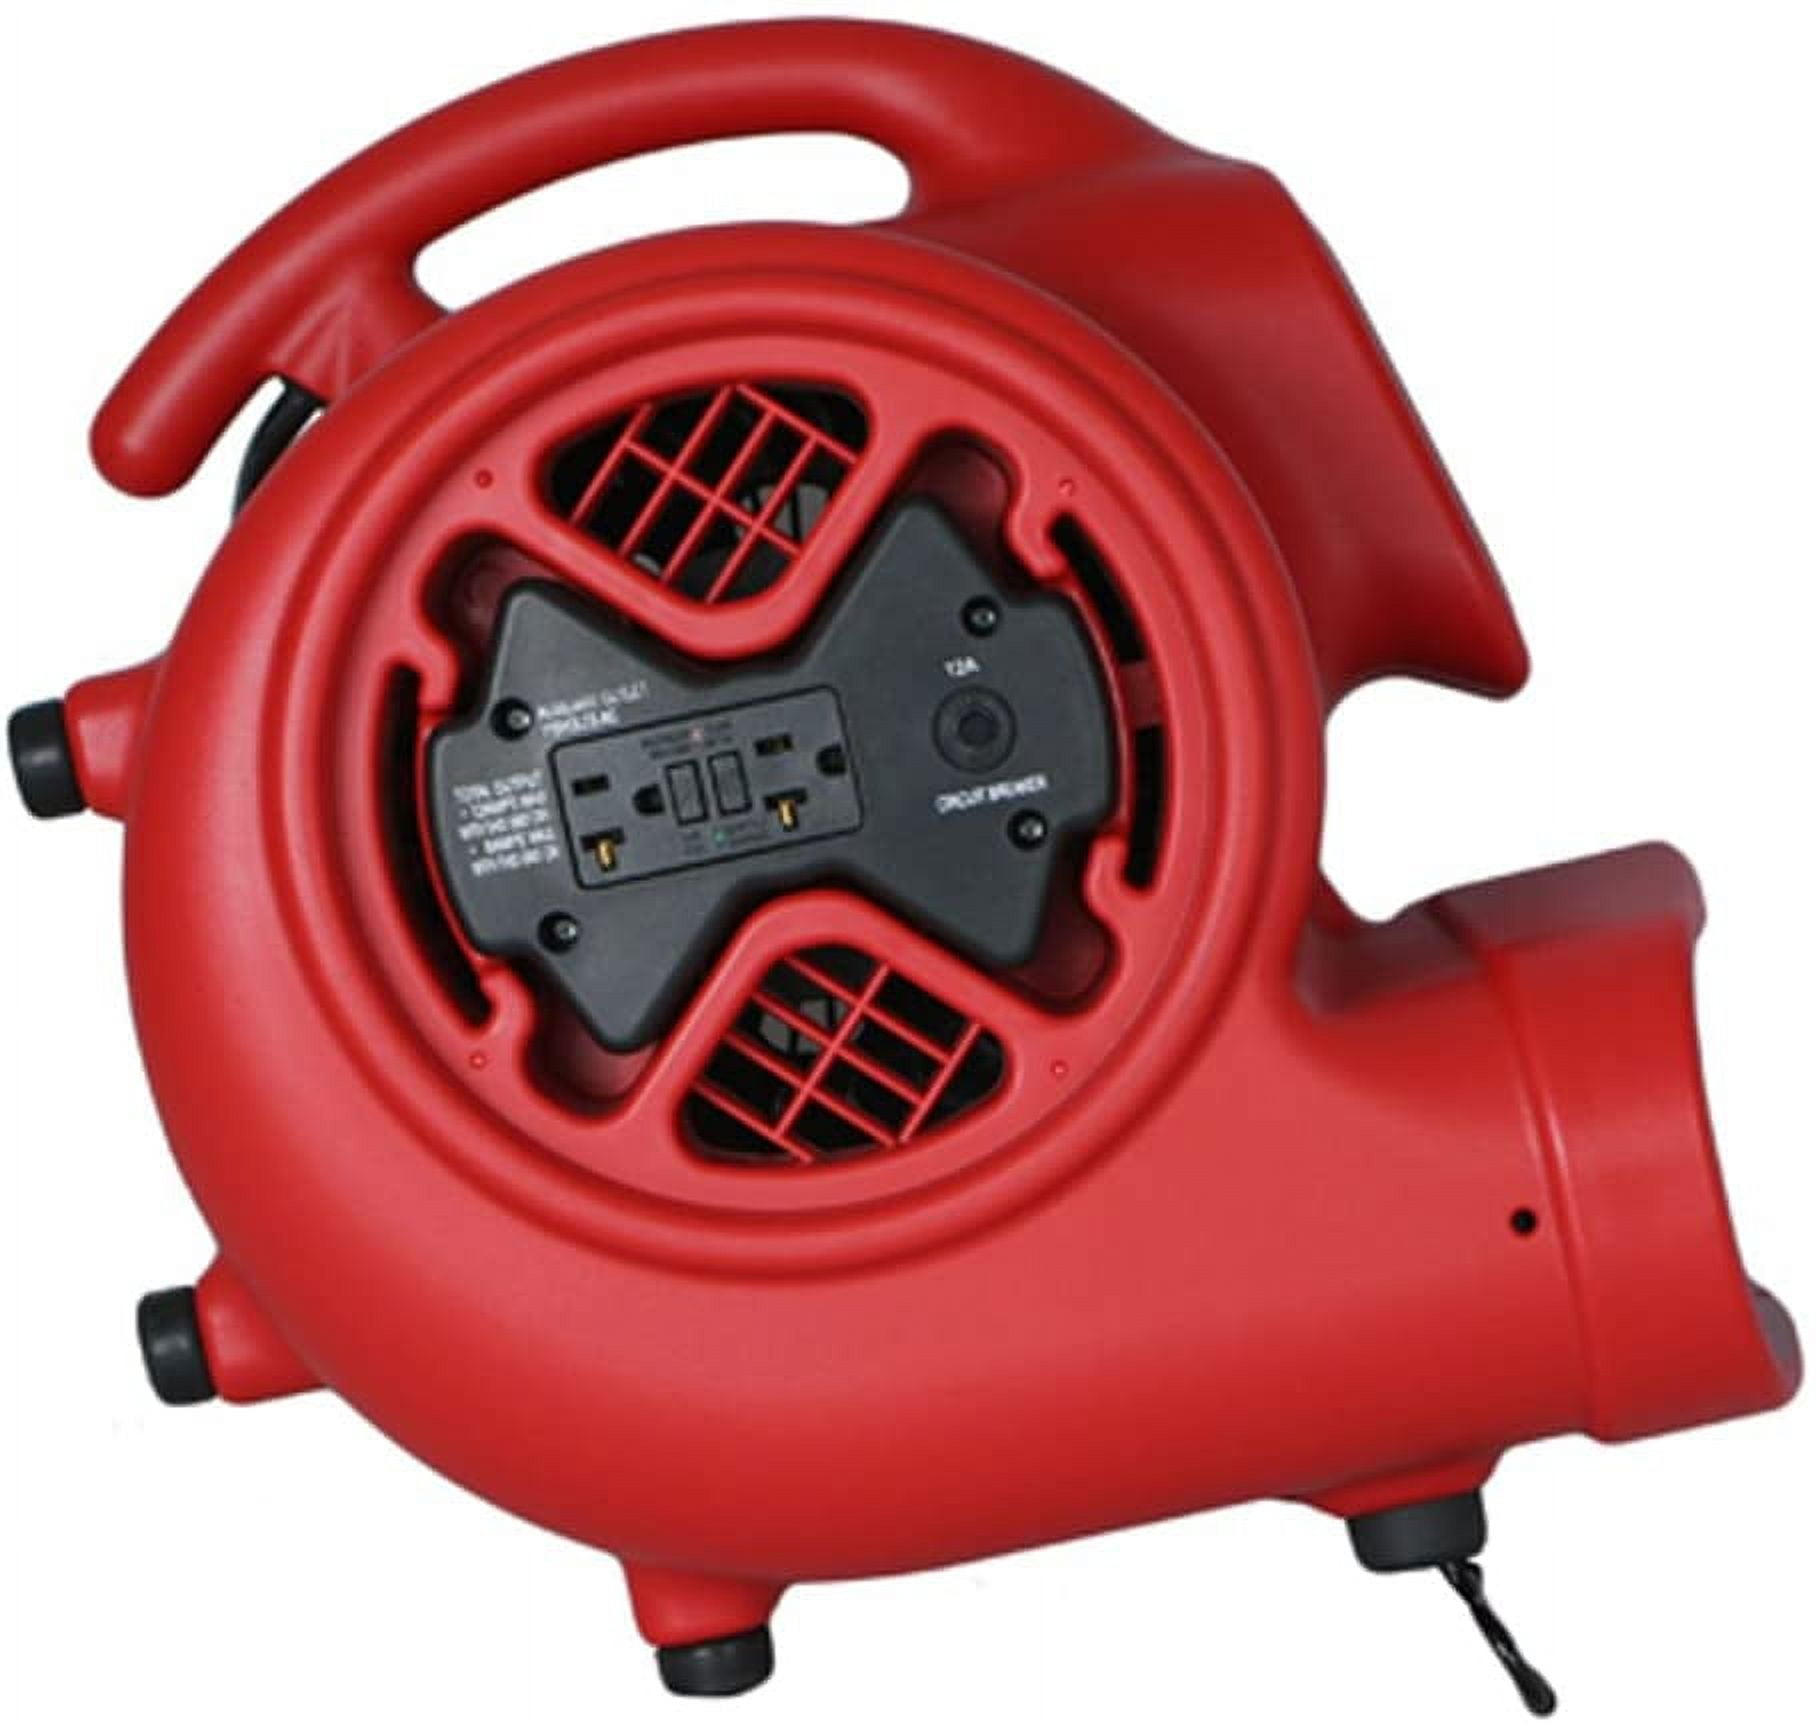 Dryser Air Mover Carpet Dryer 3 Speed 1/3 HP Industrial Floor Fan with 2  GFCI Outlets - Gray Stackable Carpet Drying Fan Blower